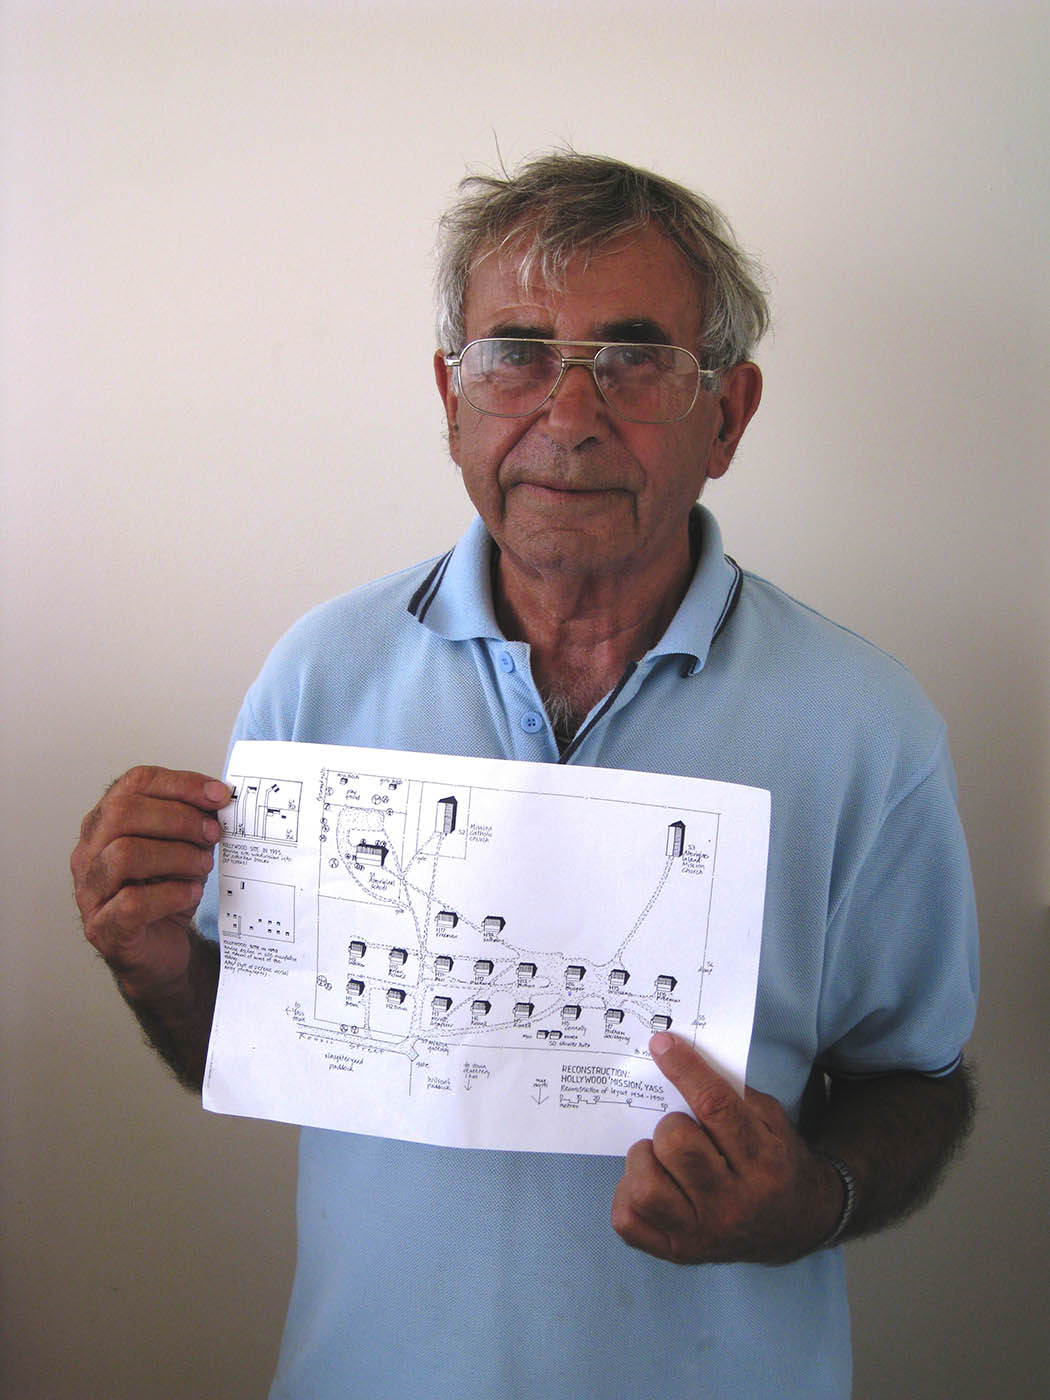 Eric Bell points to the bottom right corner of a sheet of A4 paper, marked with building locations. - click to view larger image